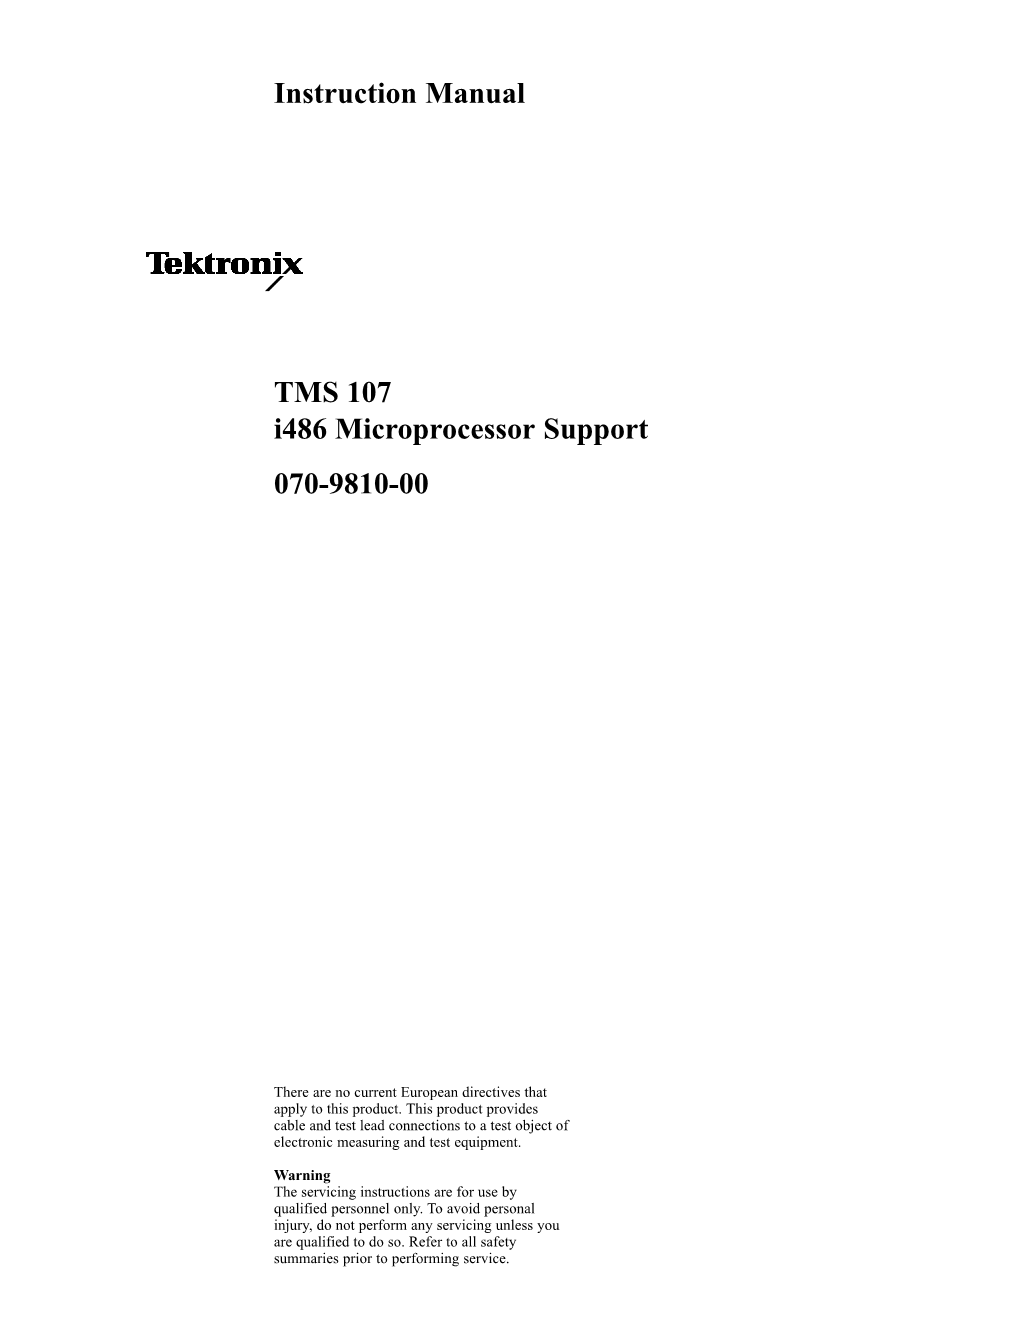 Instruction Manual TMS 107 I486 Microprocessor Support 070-9810-00